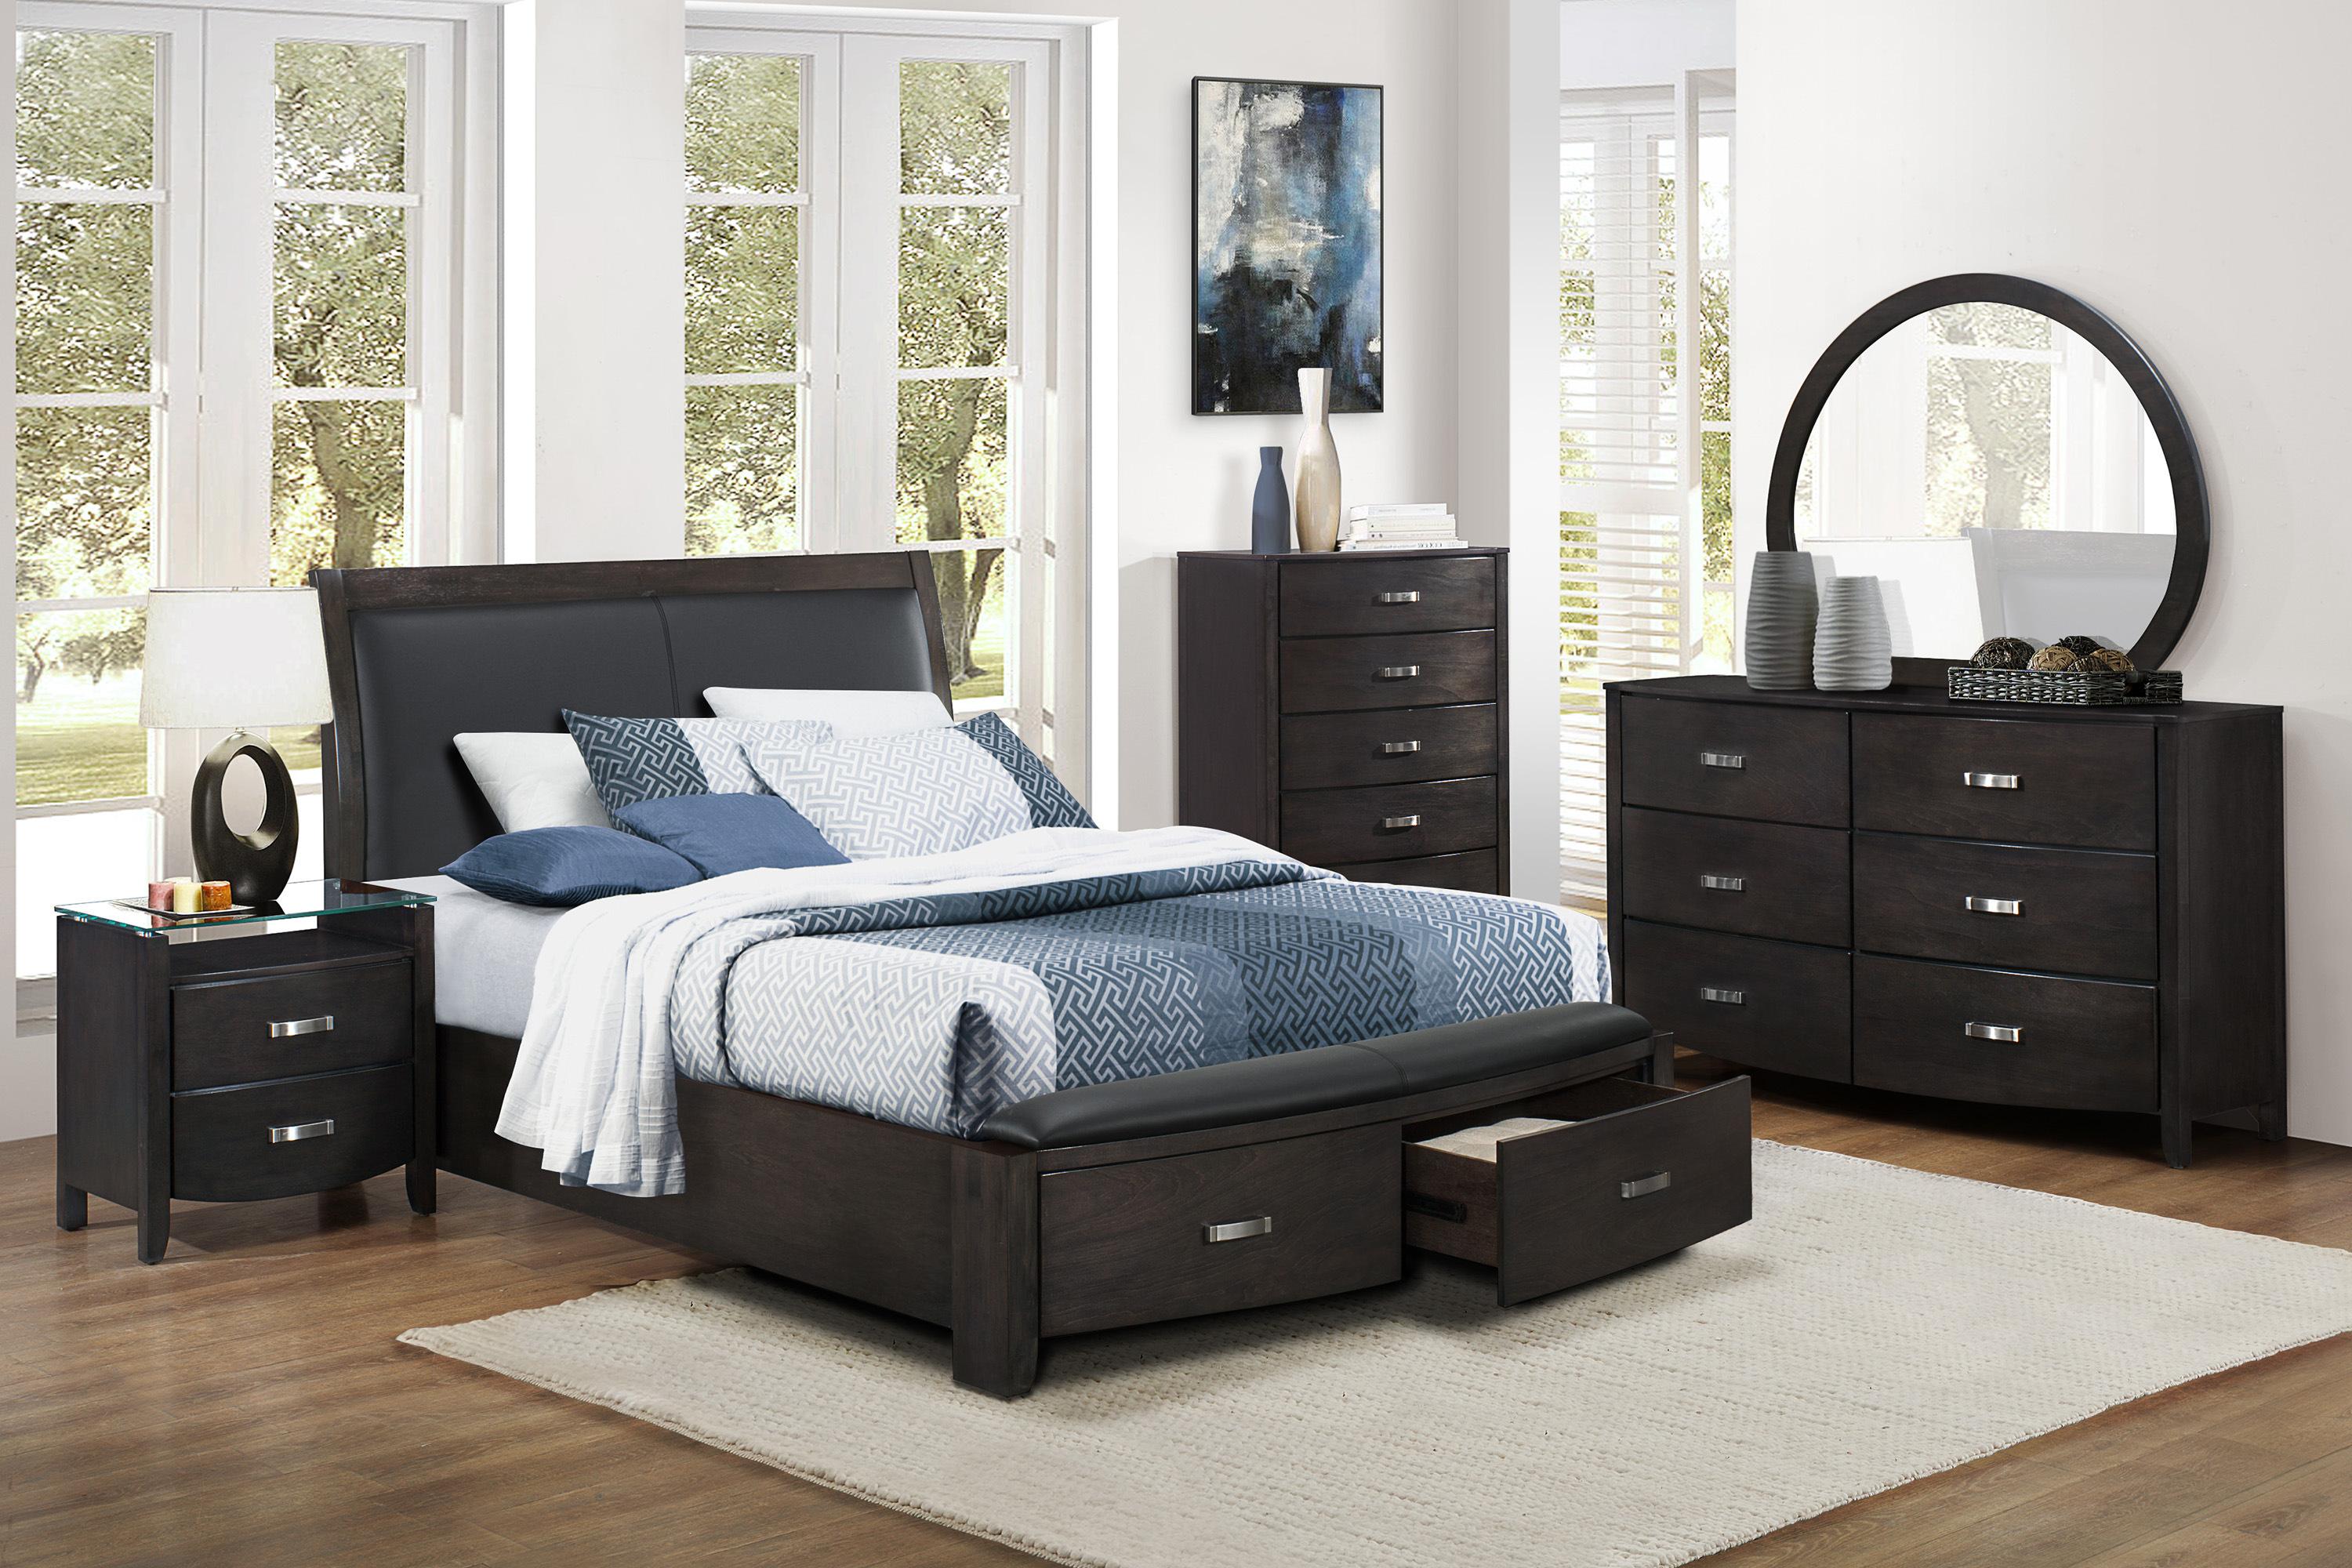 Contemporary Bedroom Set 1737KNGY-1EK-6PC Lyric 1737KNGY-1EK-6PC in Gray Faux Leather